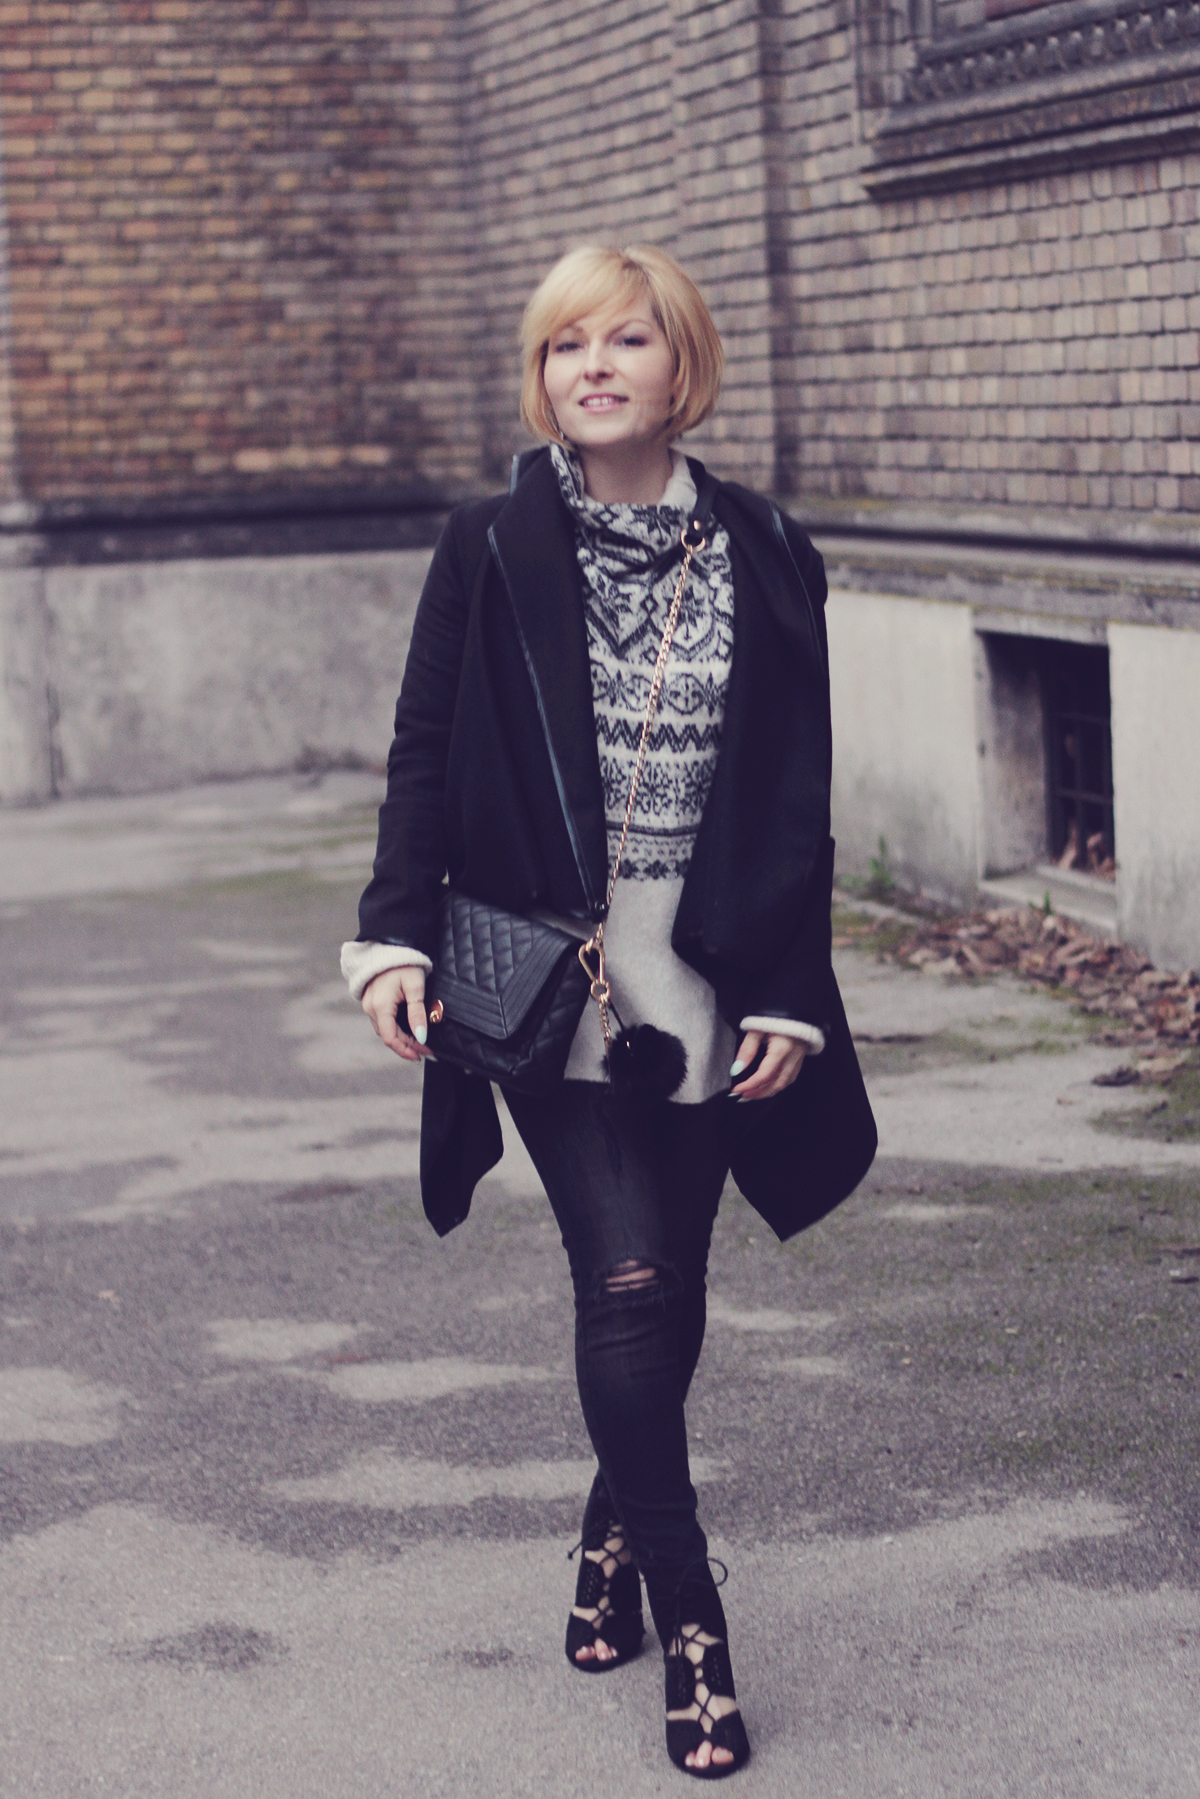 christmas winter jumper with heels and black coat